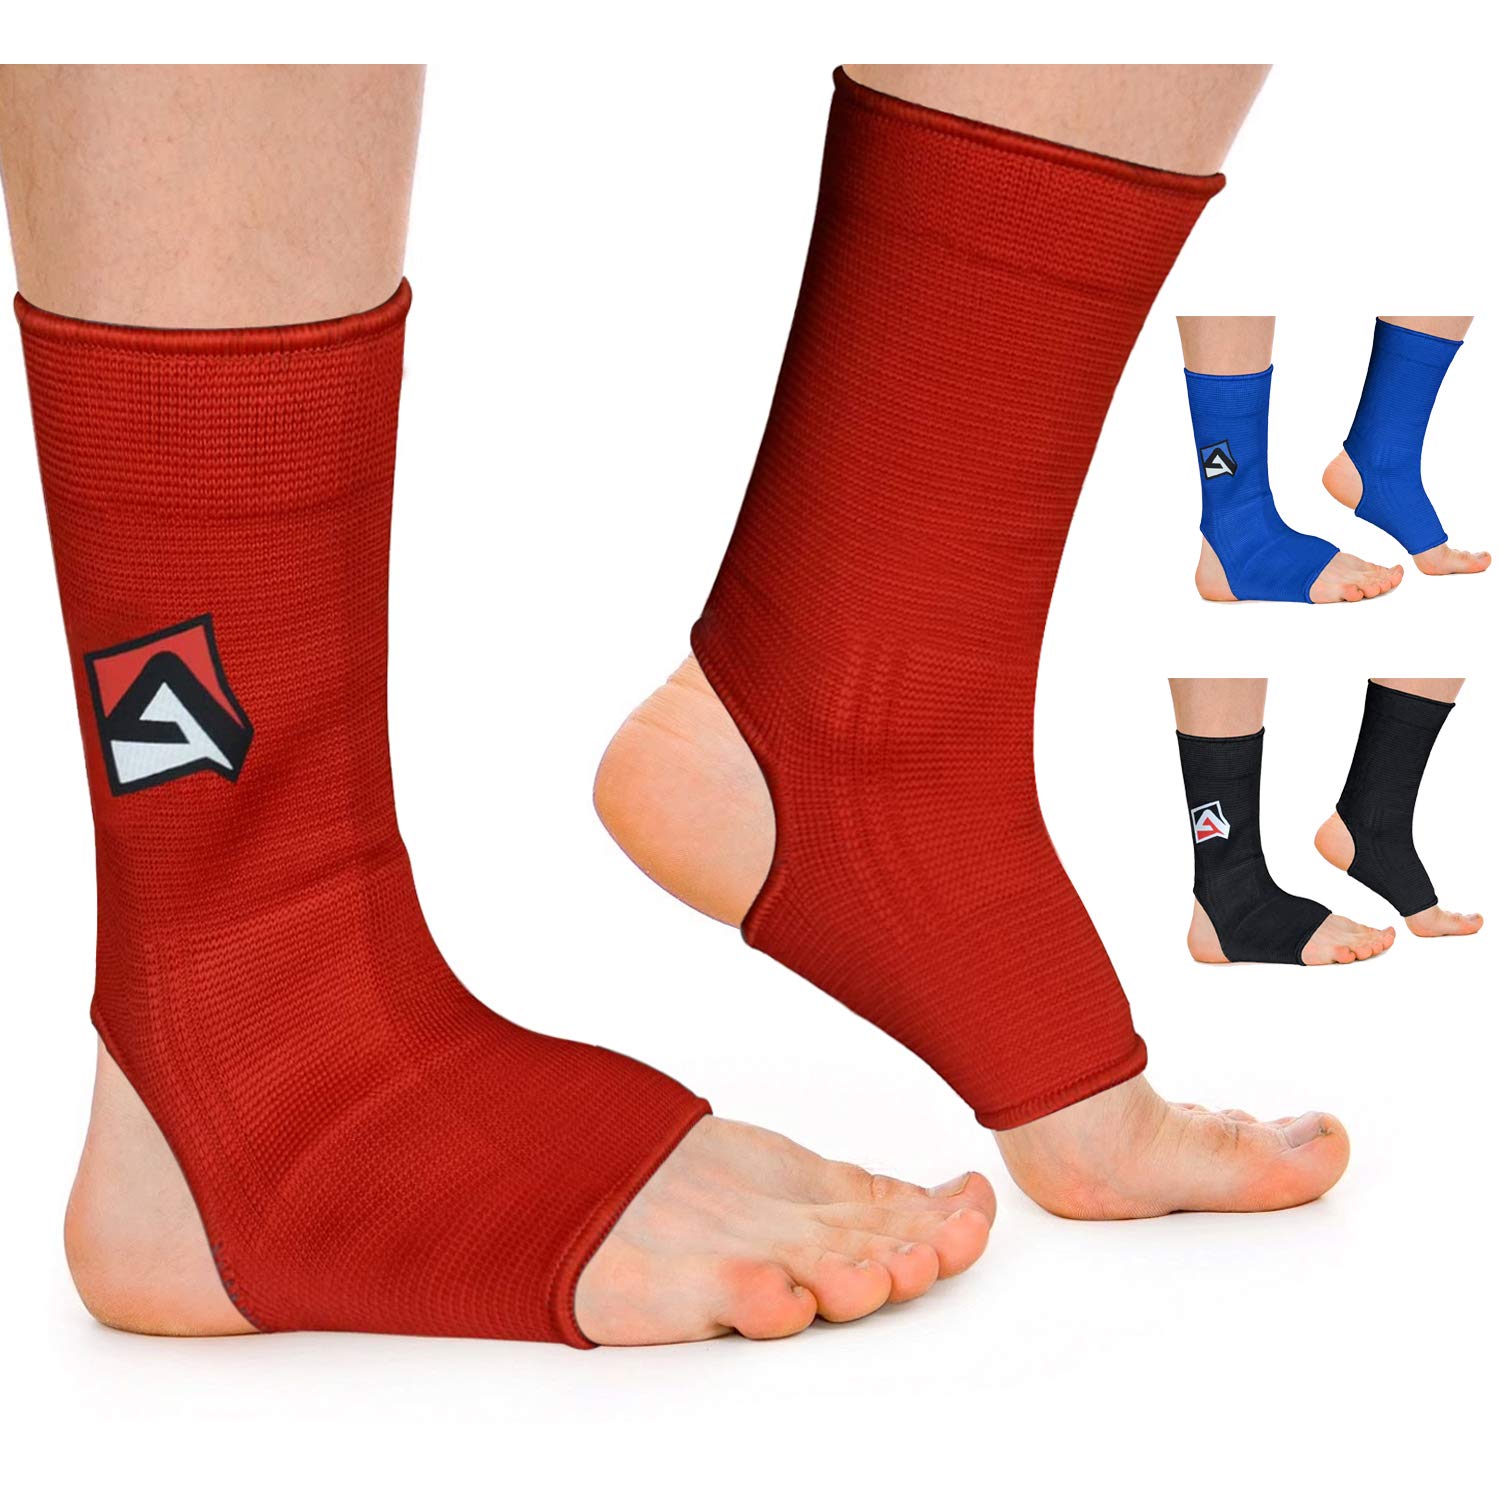 Buy Ankle Support Brace, Elasticated Compression Sleeve